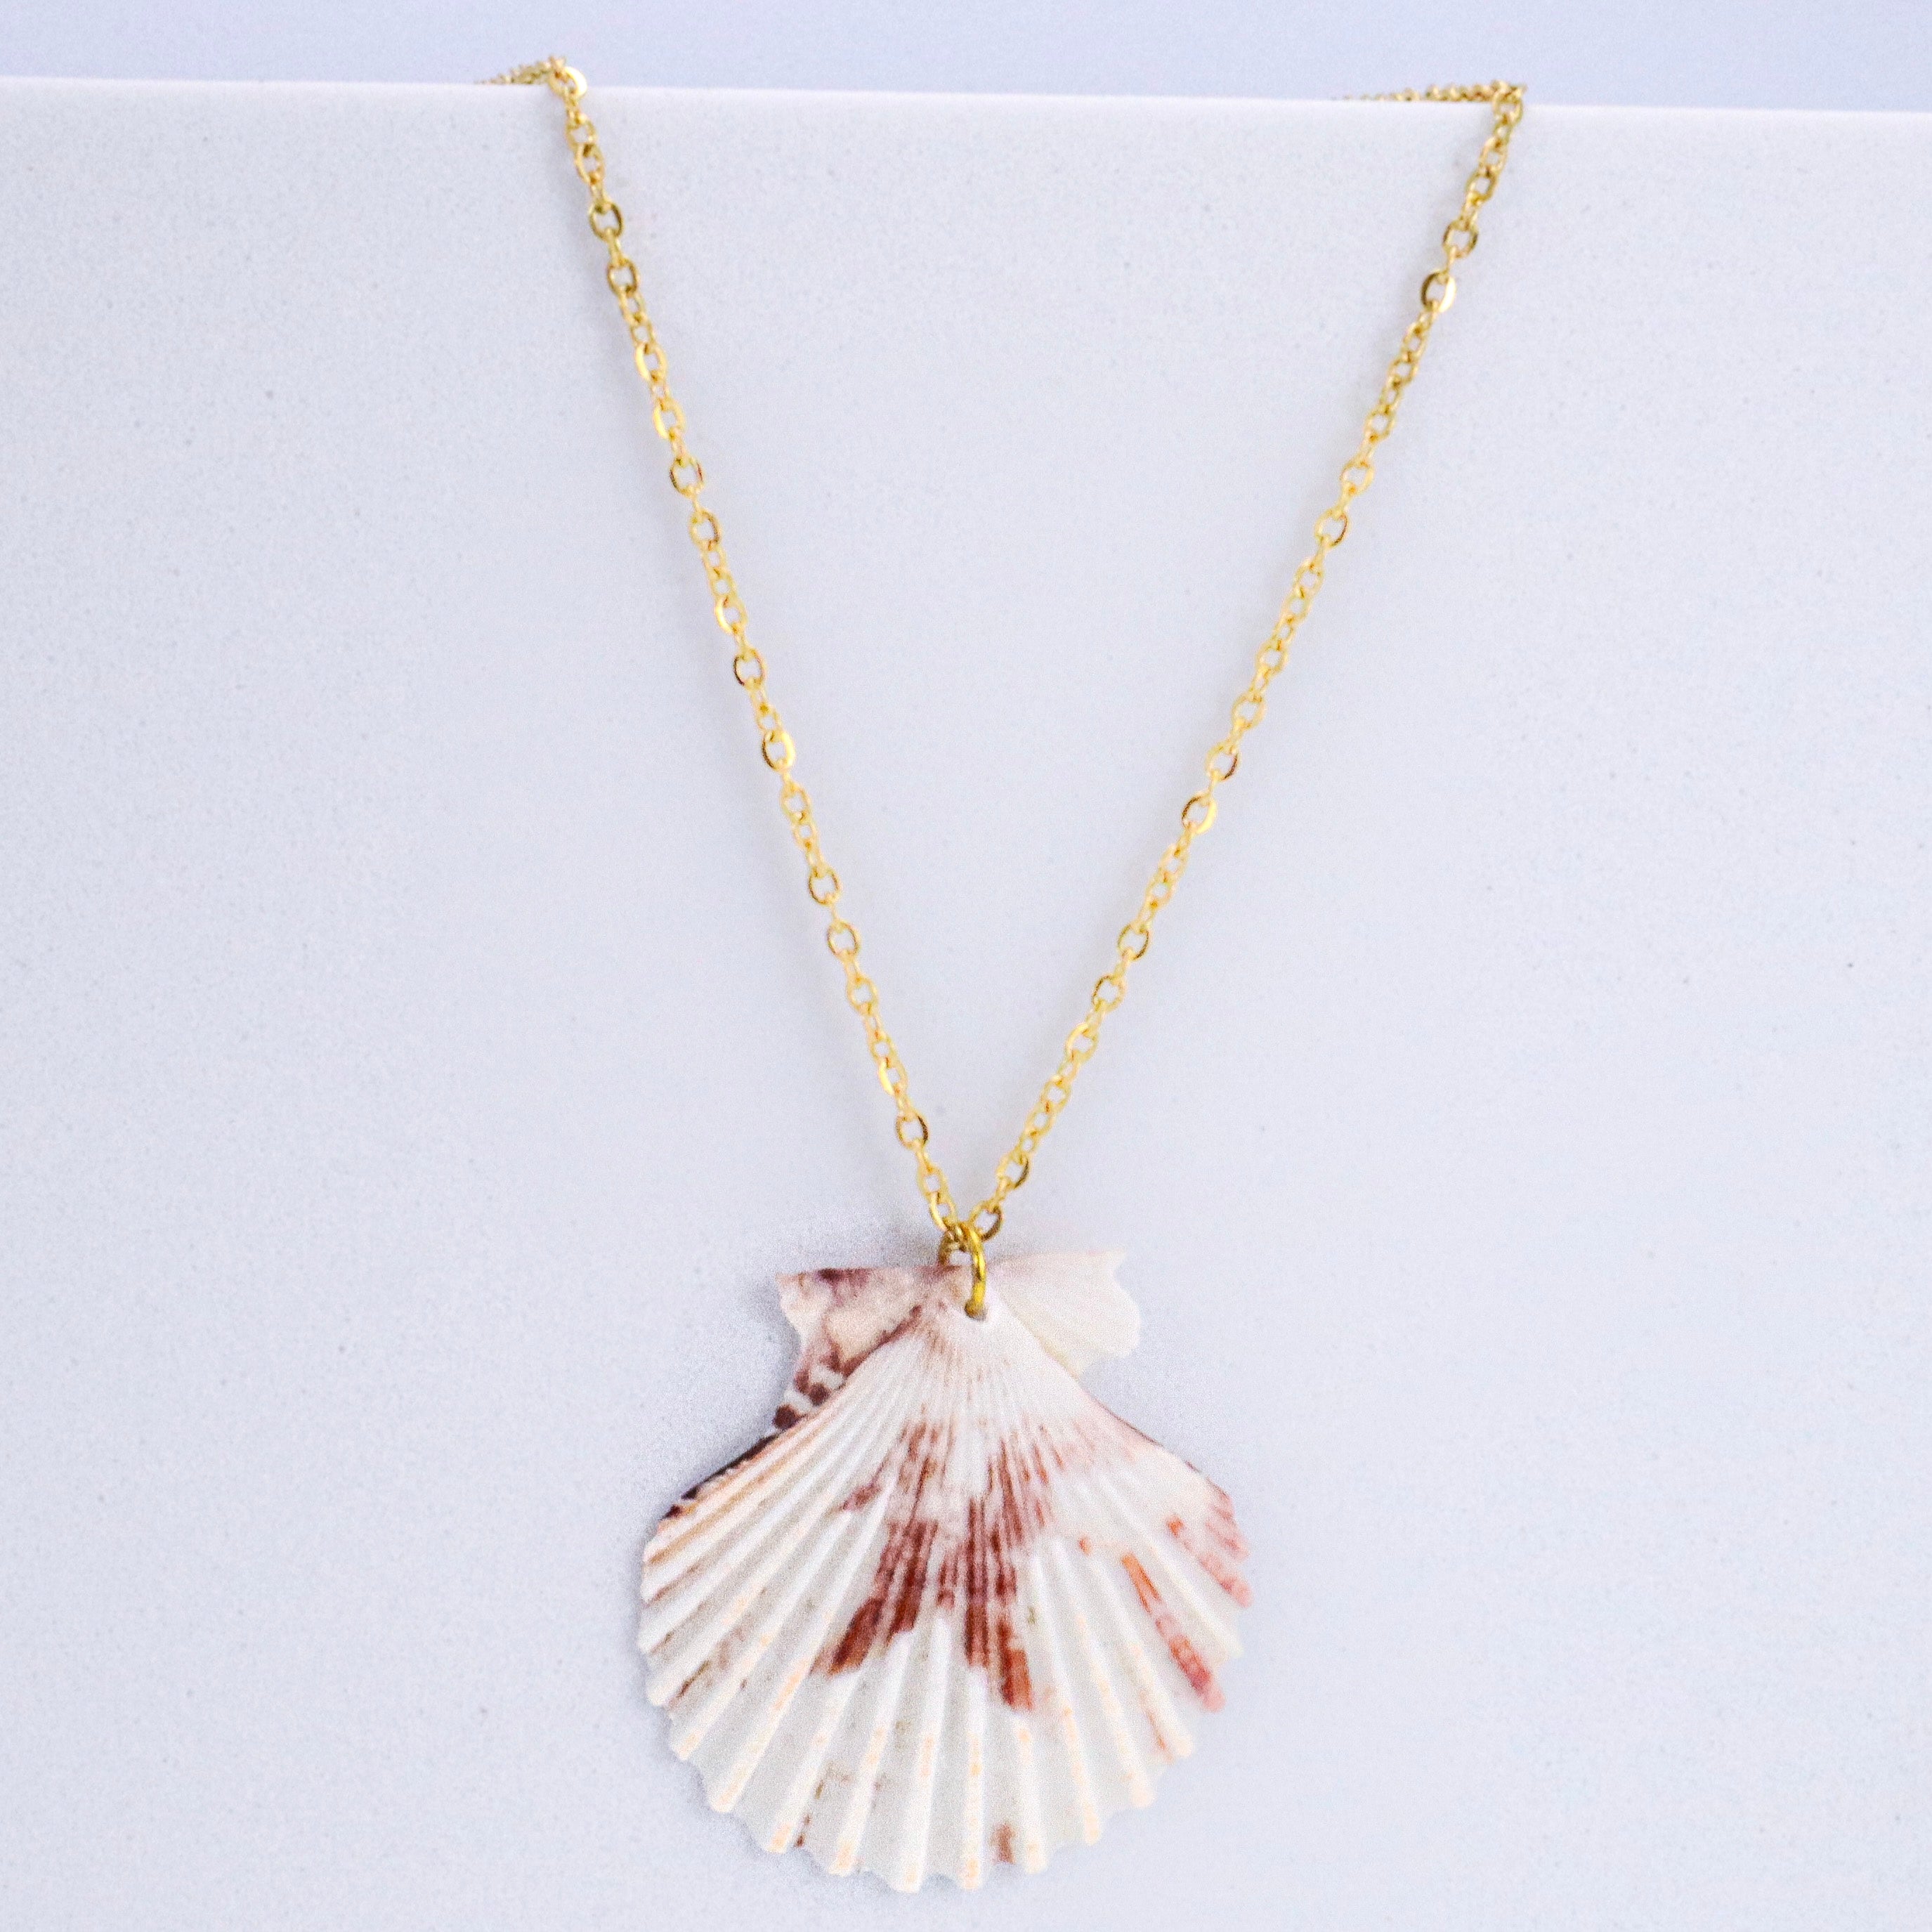 Delicate Calico Scallop Shell & 14k Gold over Stainless Steel Necklace